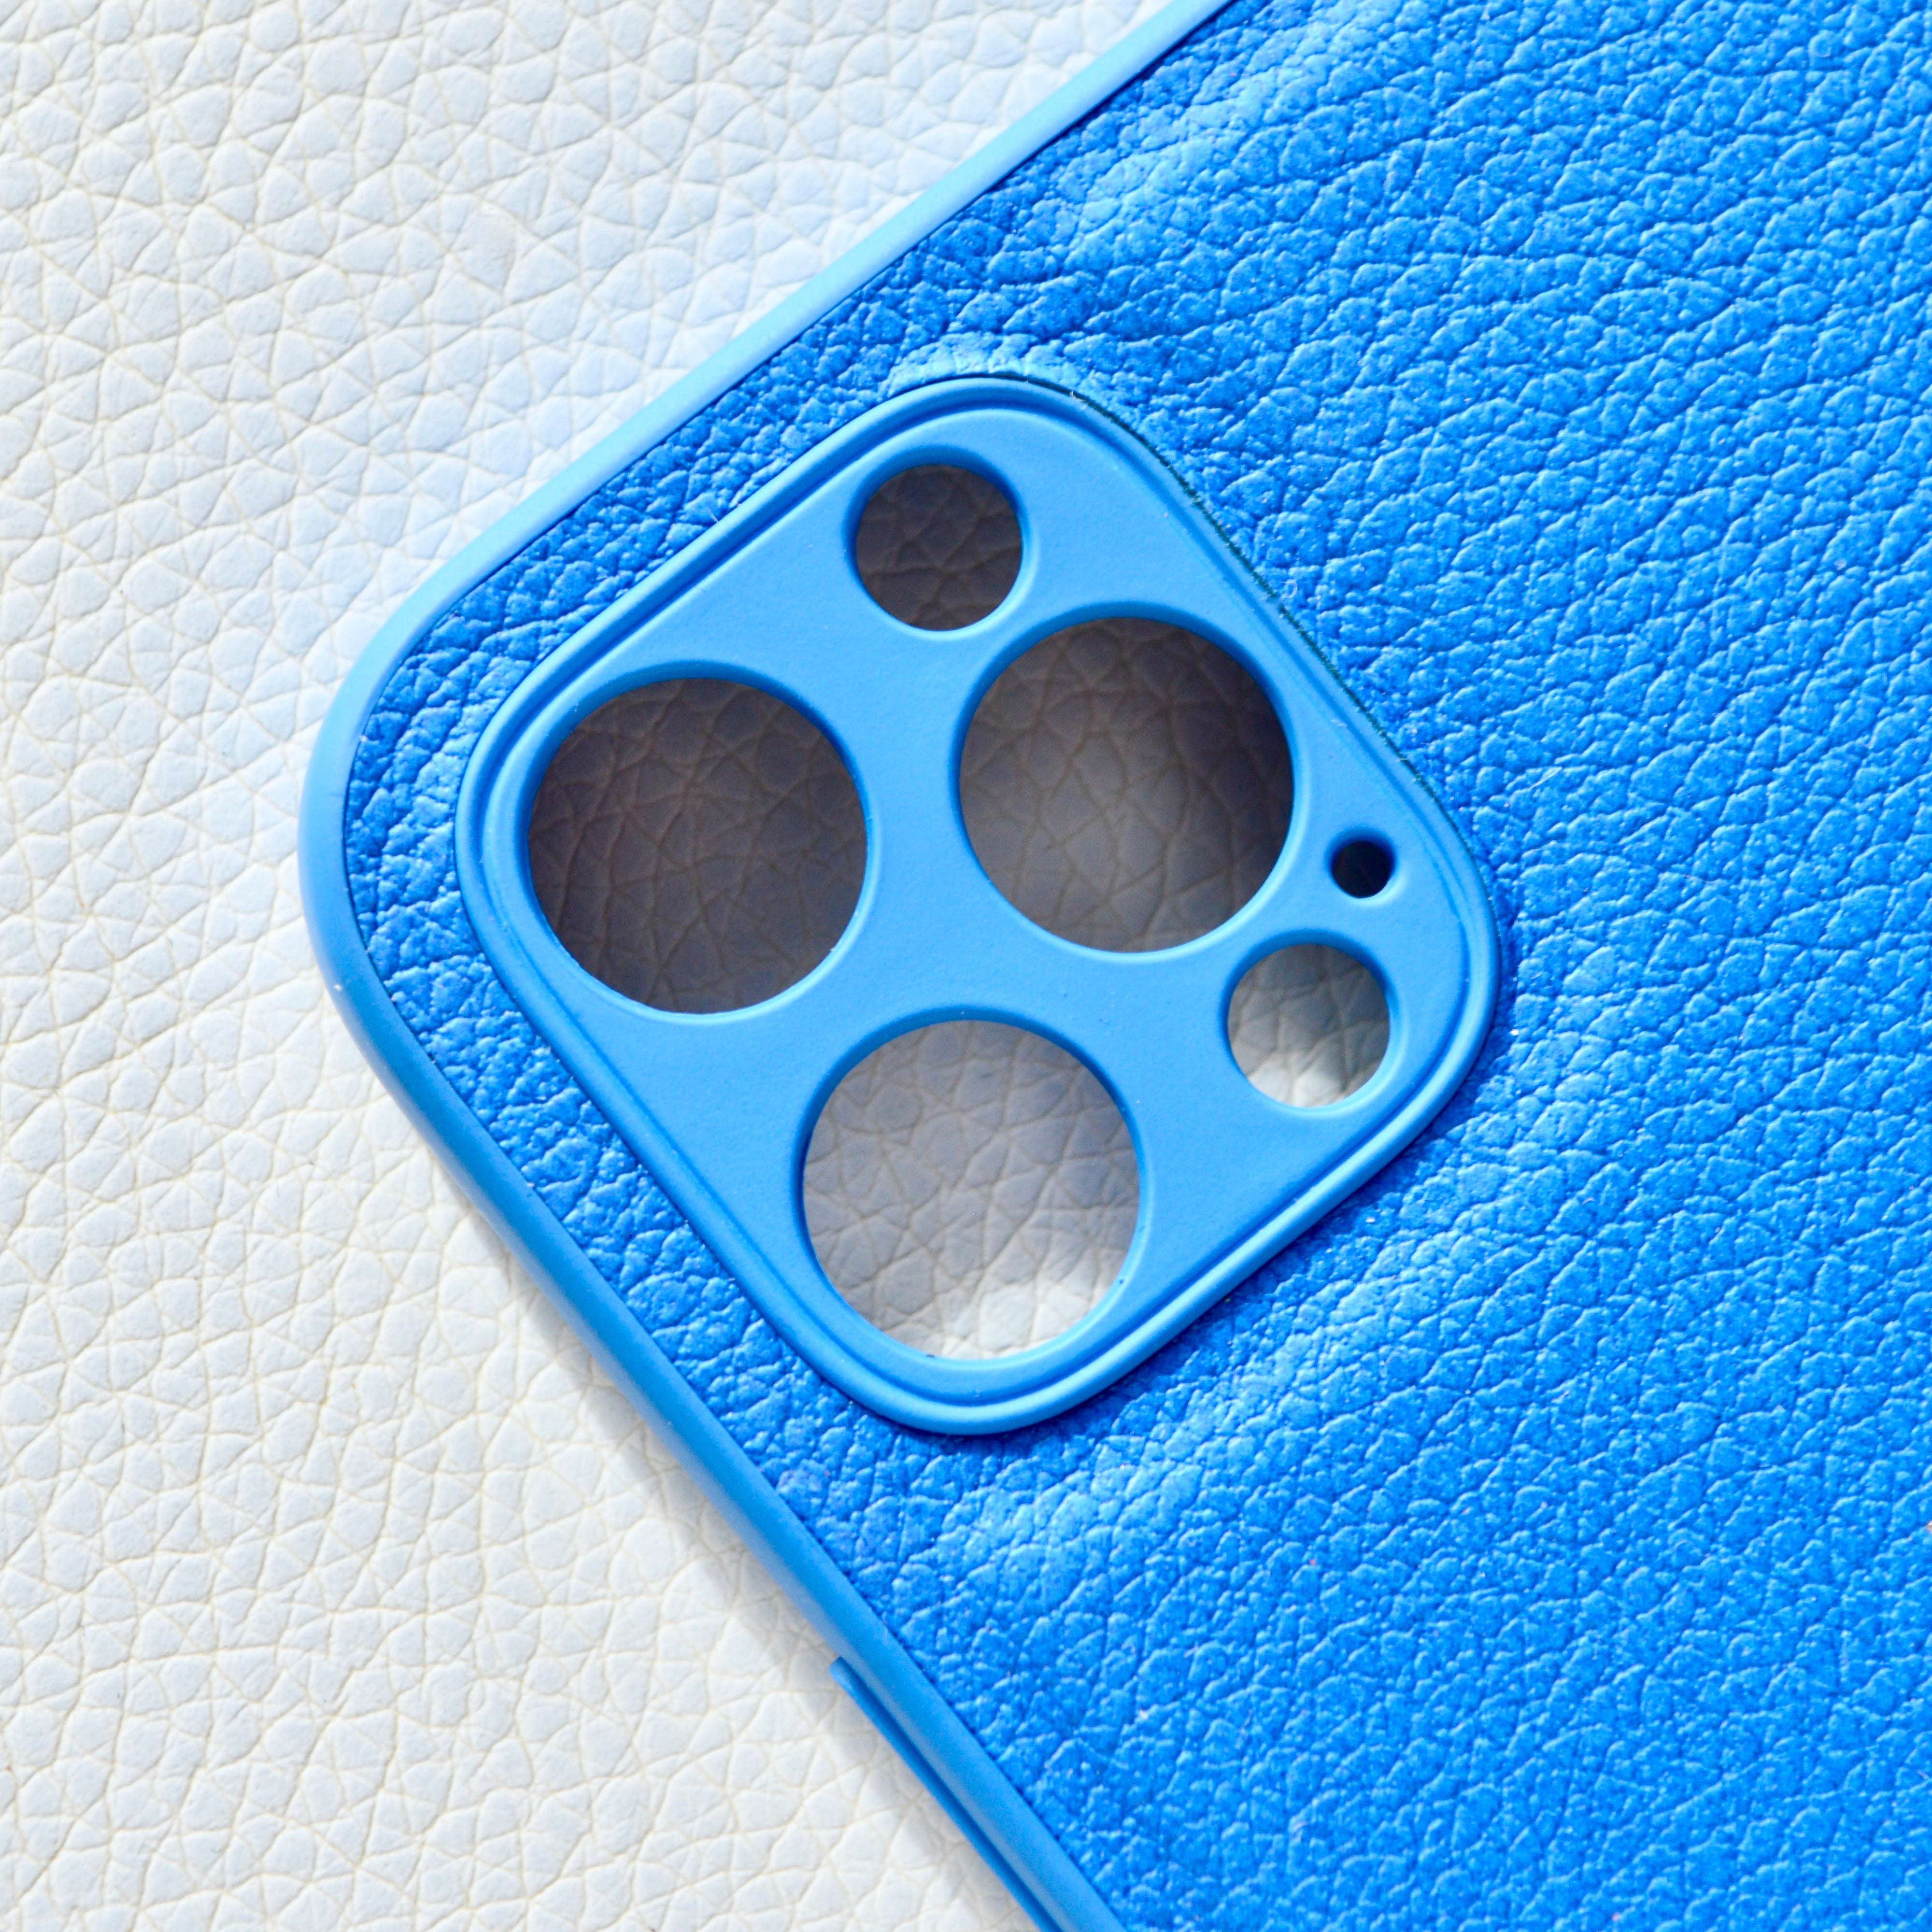 PHONE CASE IN BLUE SAFFIANO LEATHER